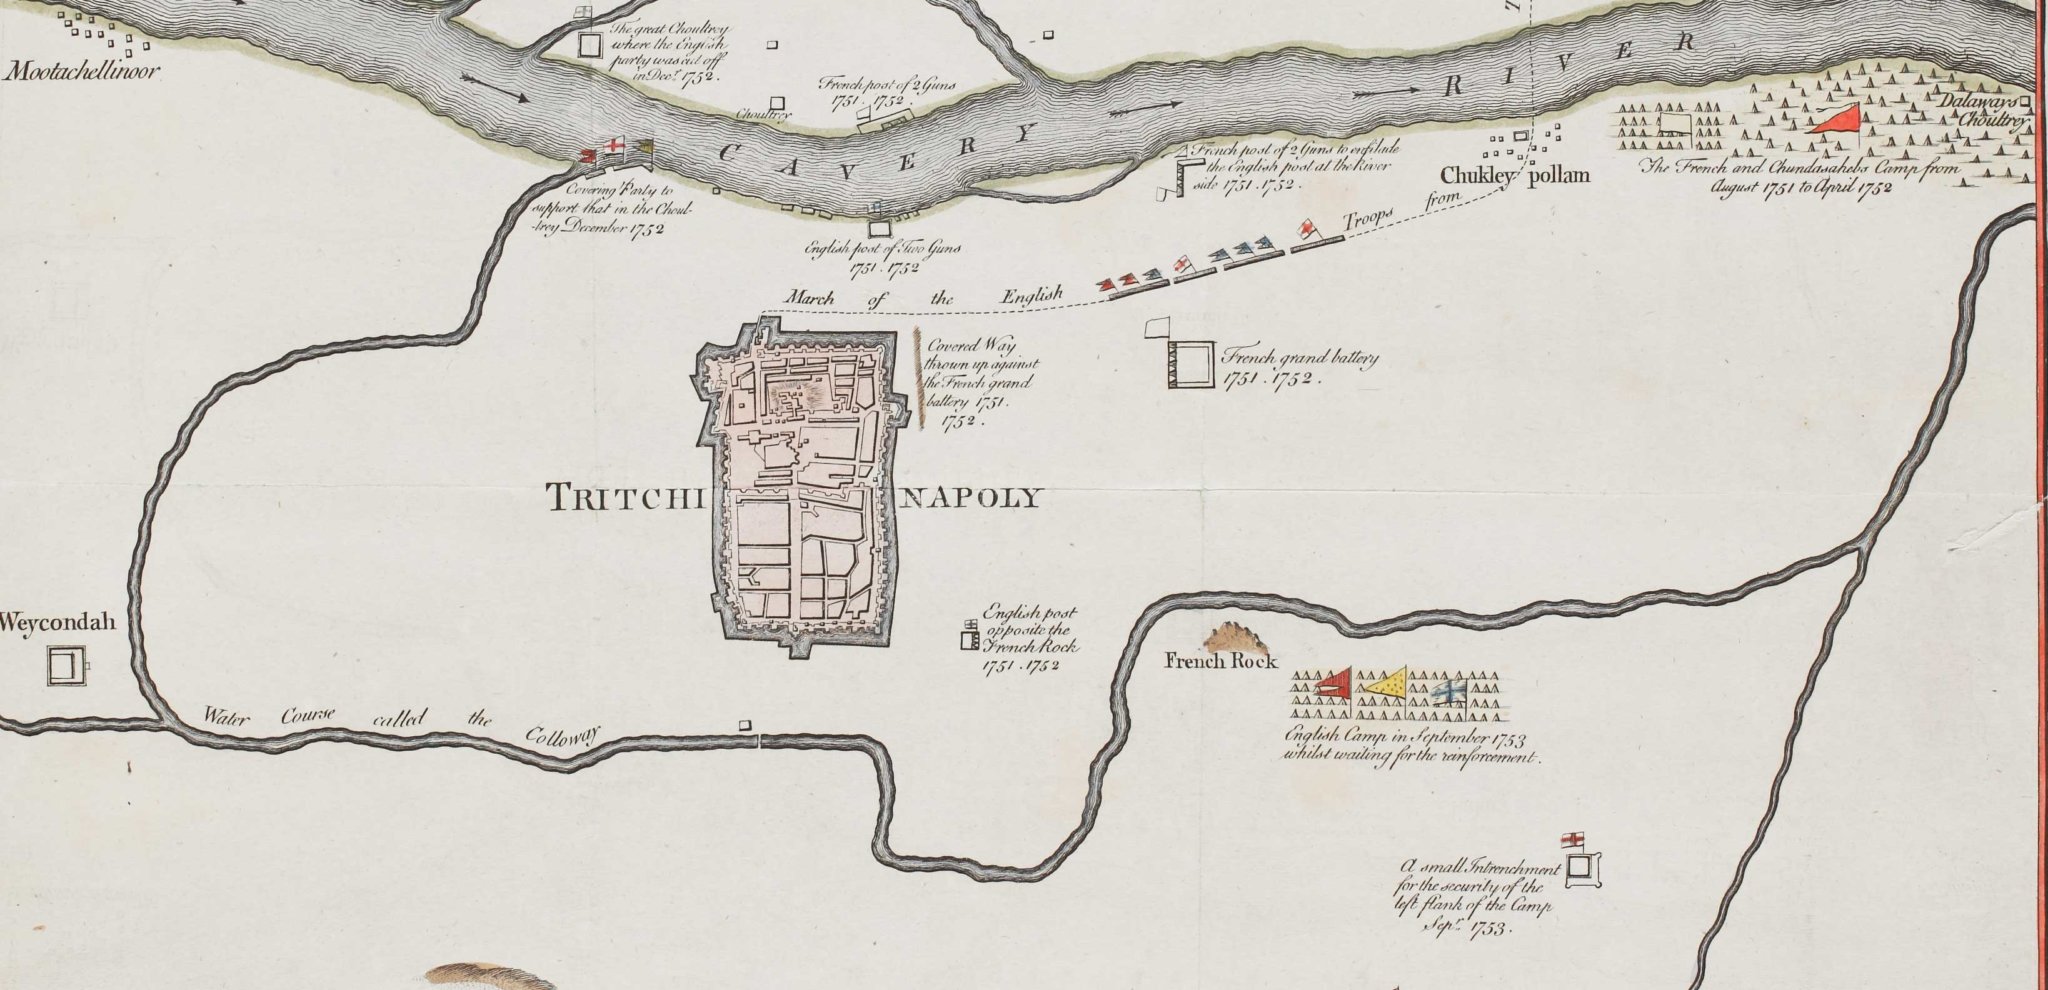 A Plan of The Country Near Tritchinapoly